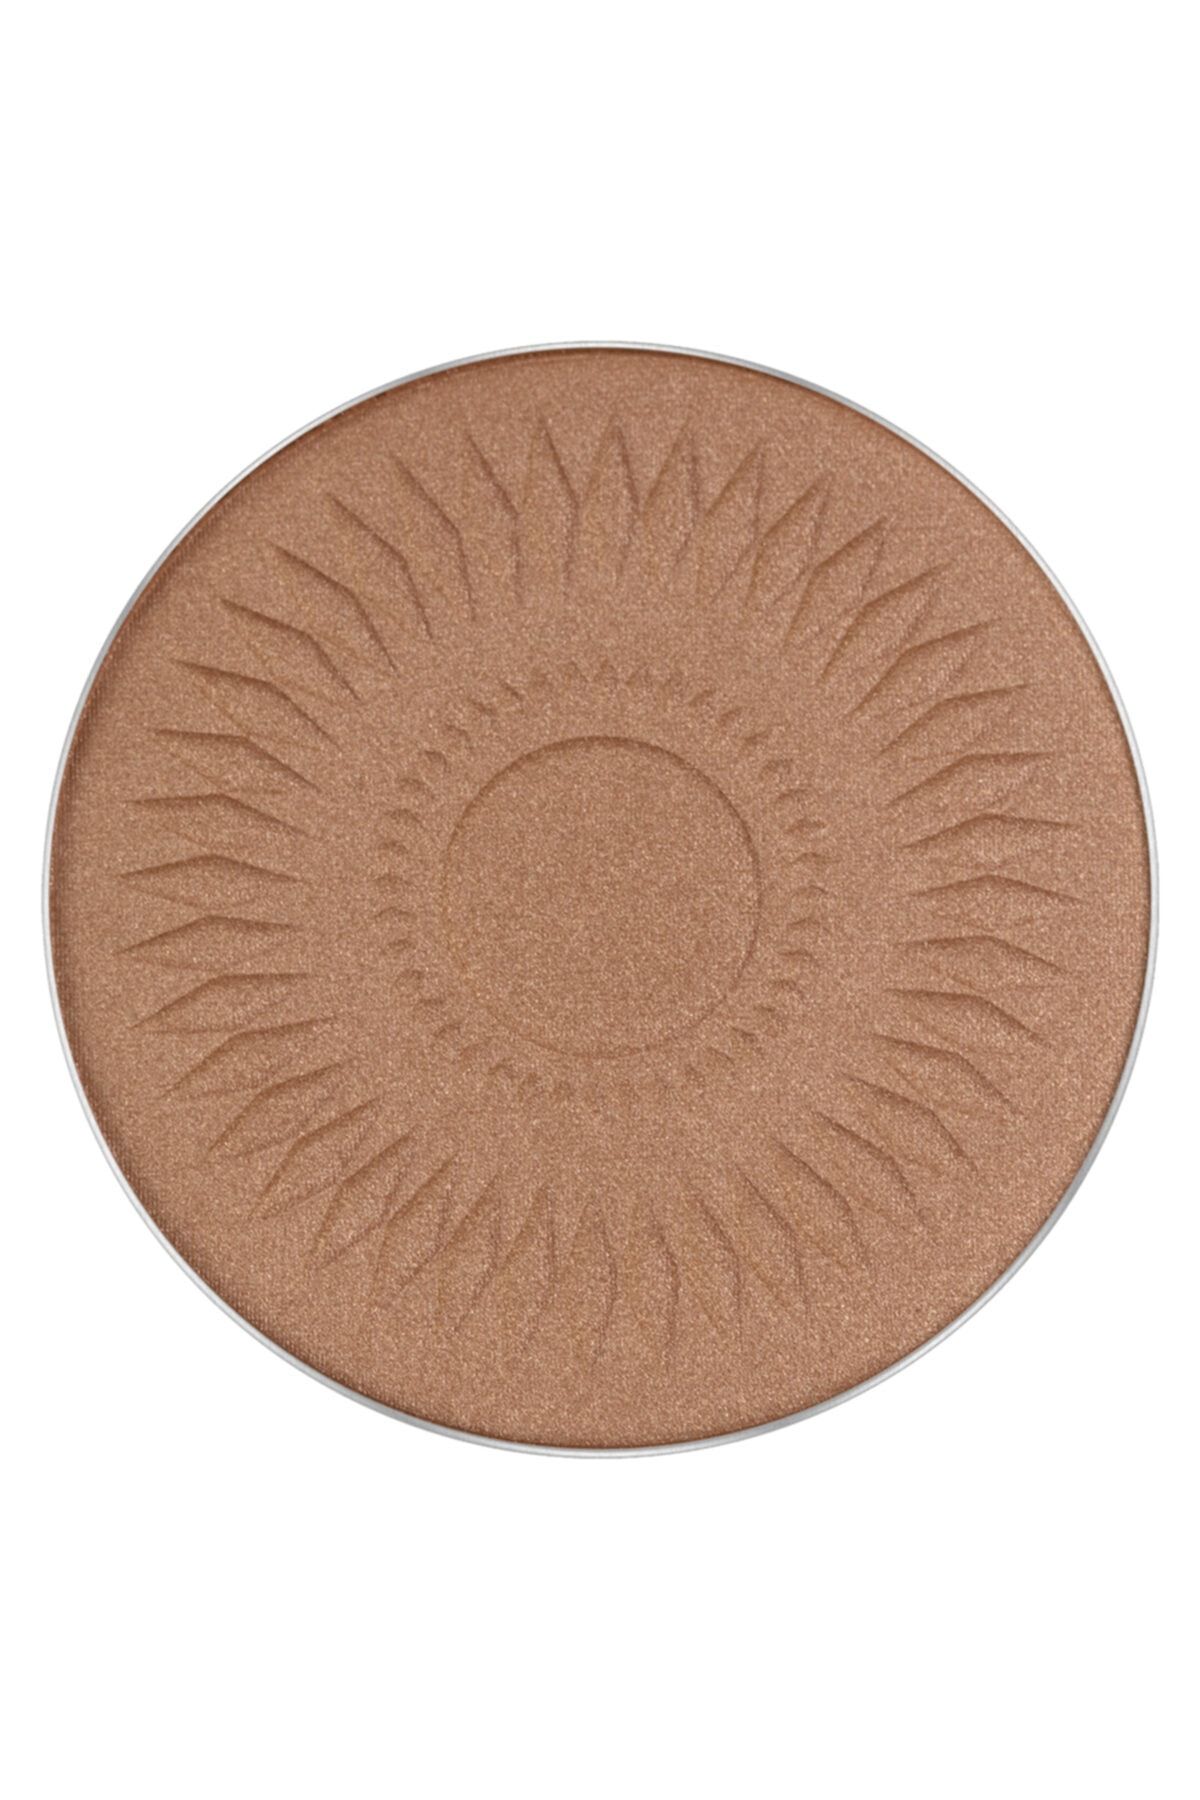 Inglot Fr Sys Always The Sun Glow Face Bronzer 701